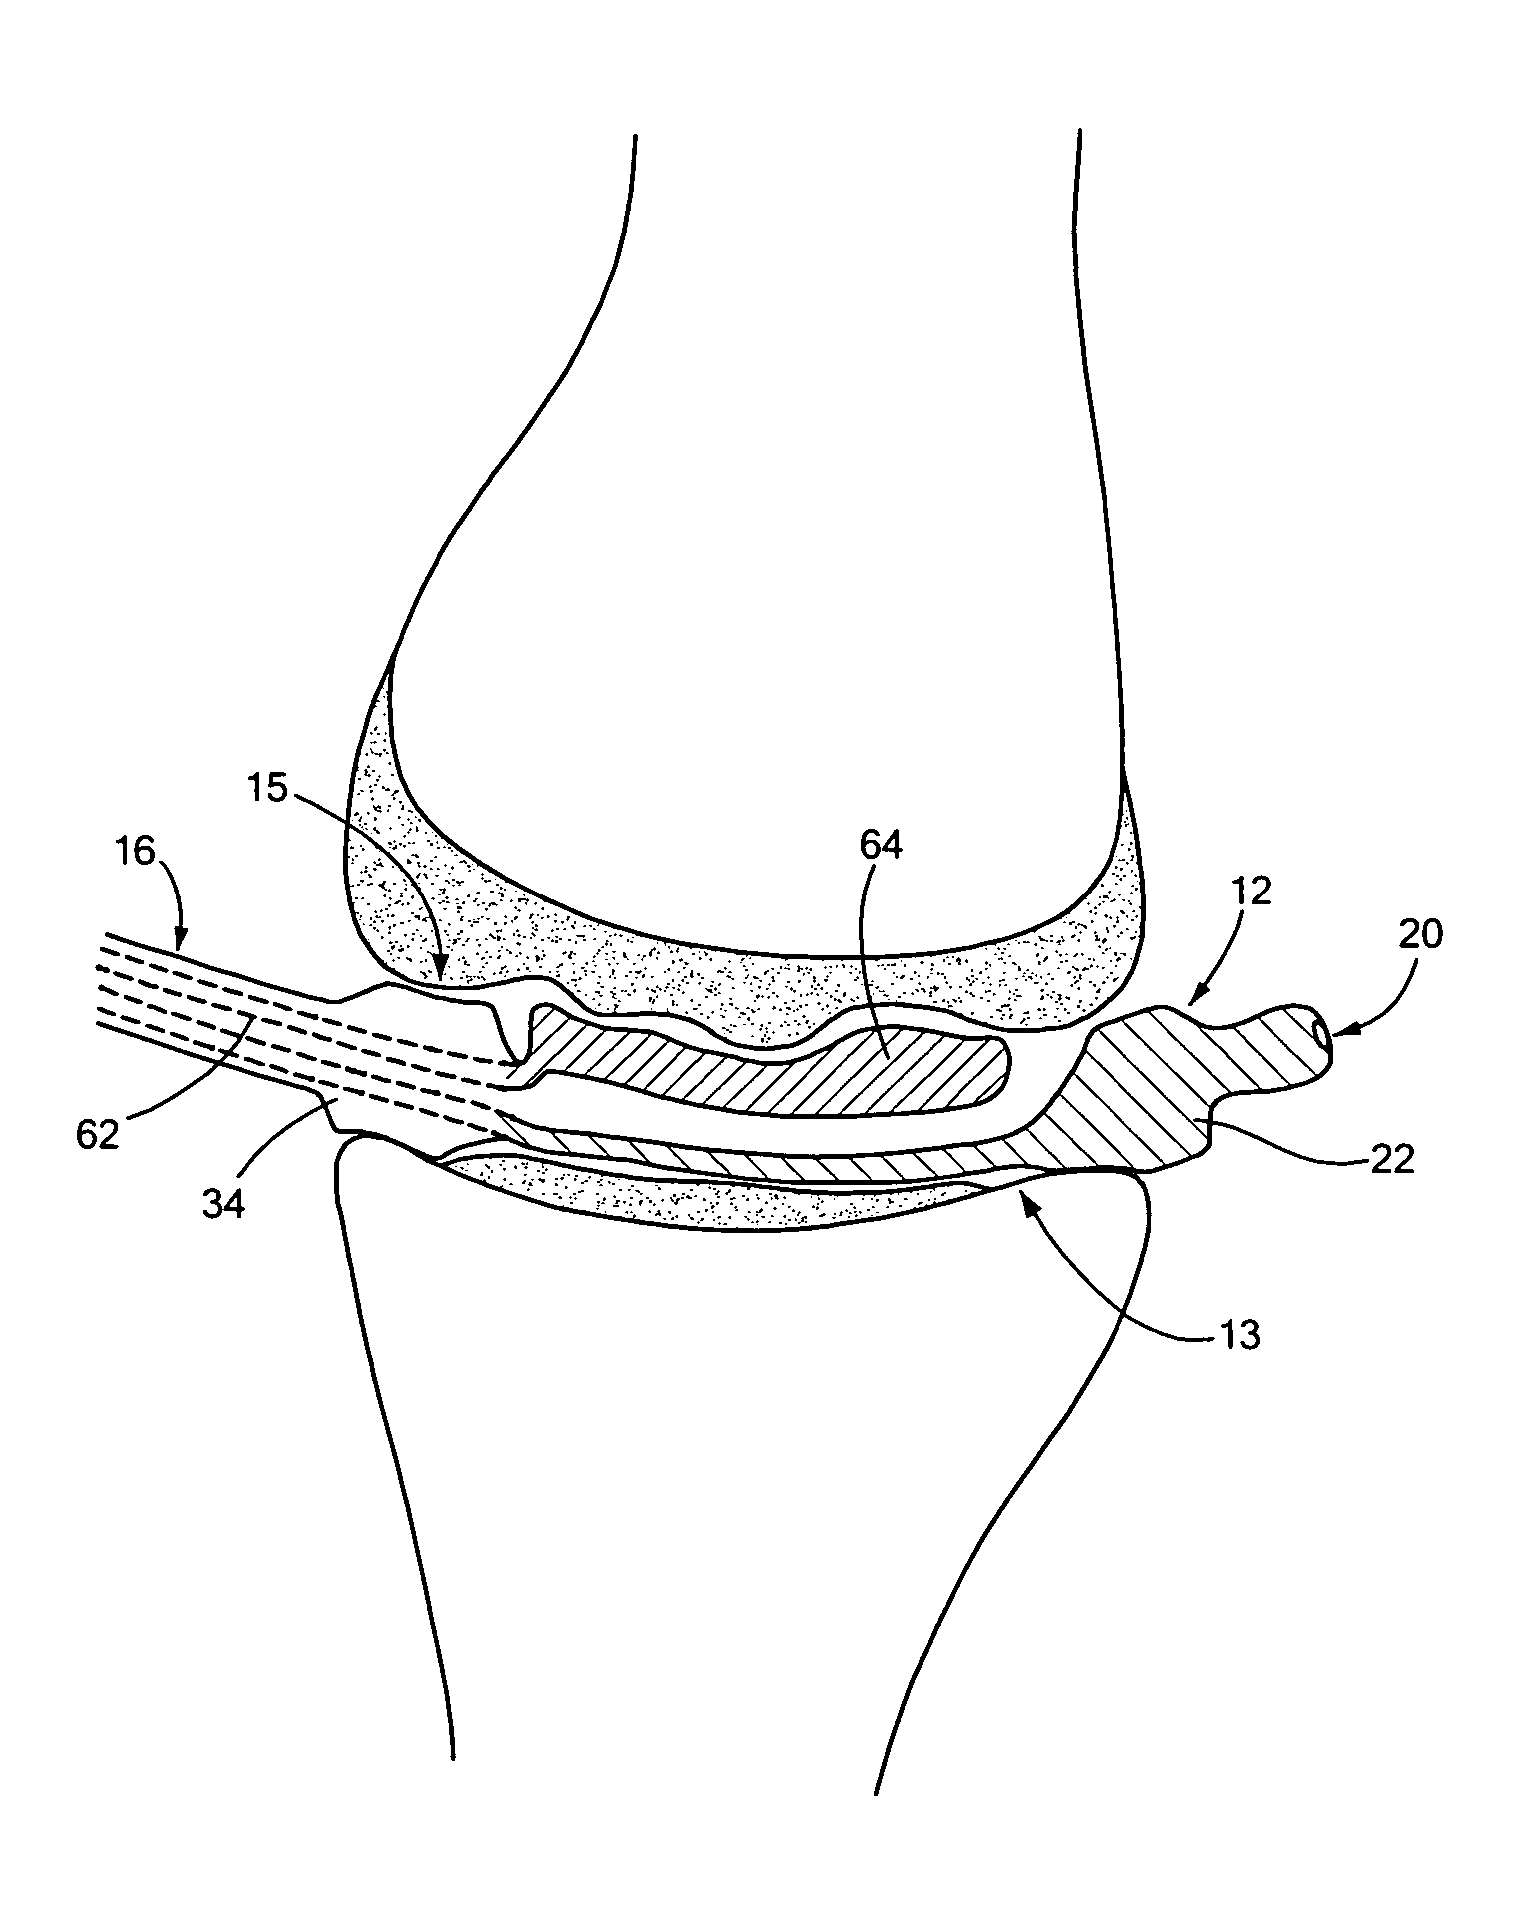 Joint arthroplasty devices formed in situ